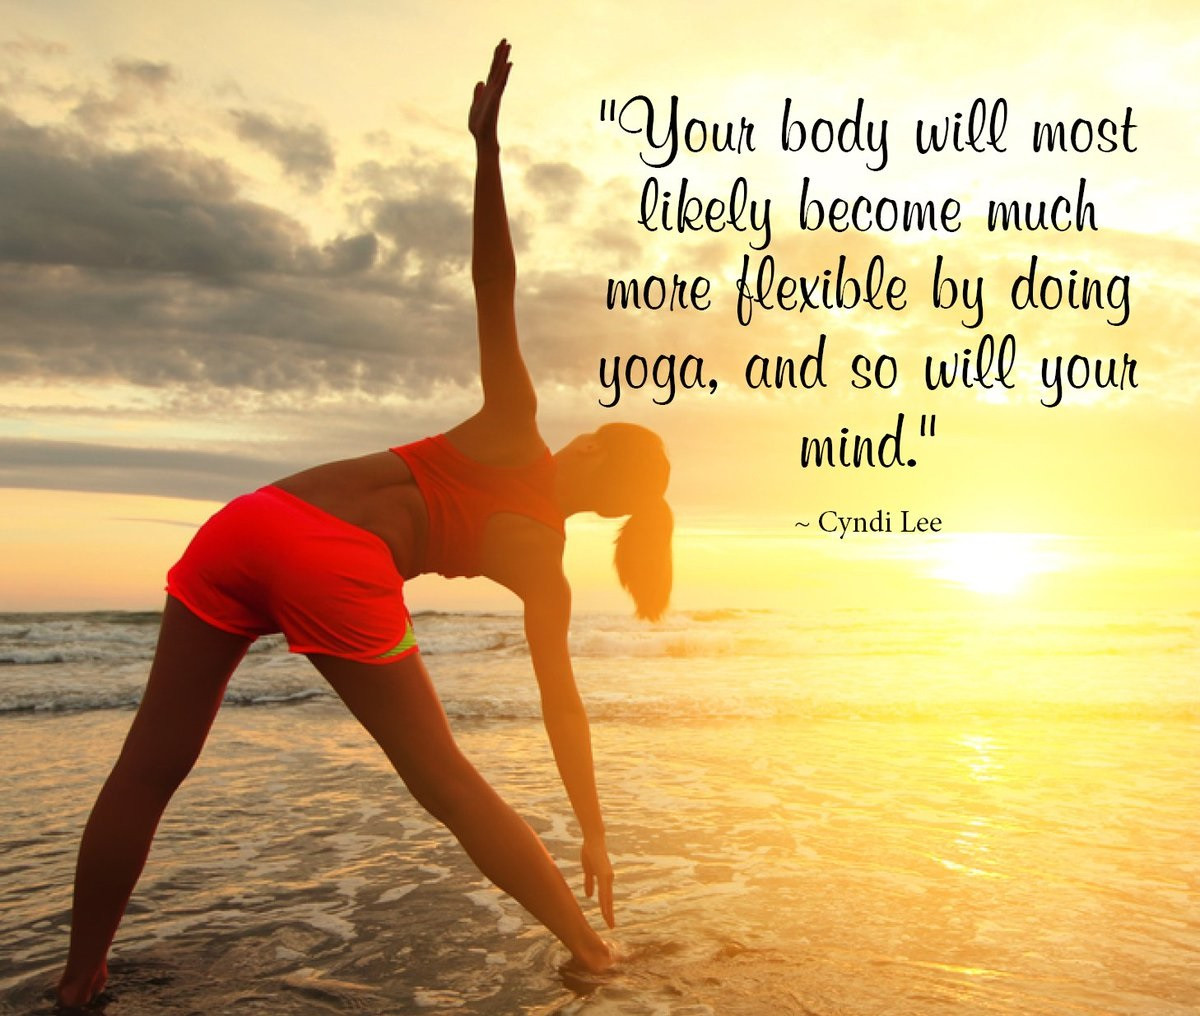 Yoga Quotes About Life
 Best Yoga Quotes That Will Motivate You To Live Your Life